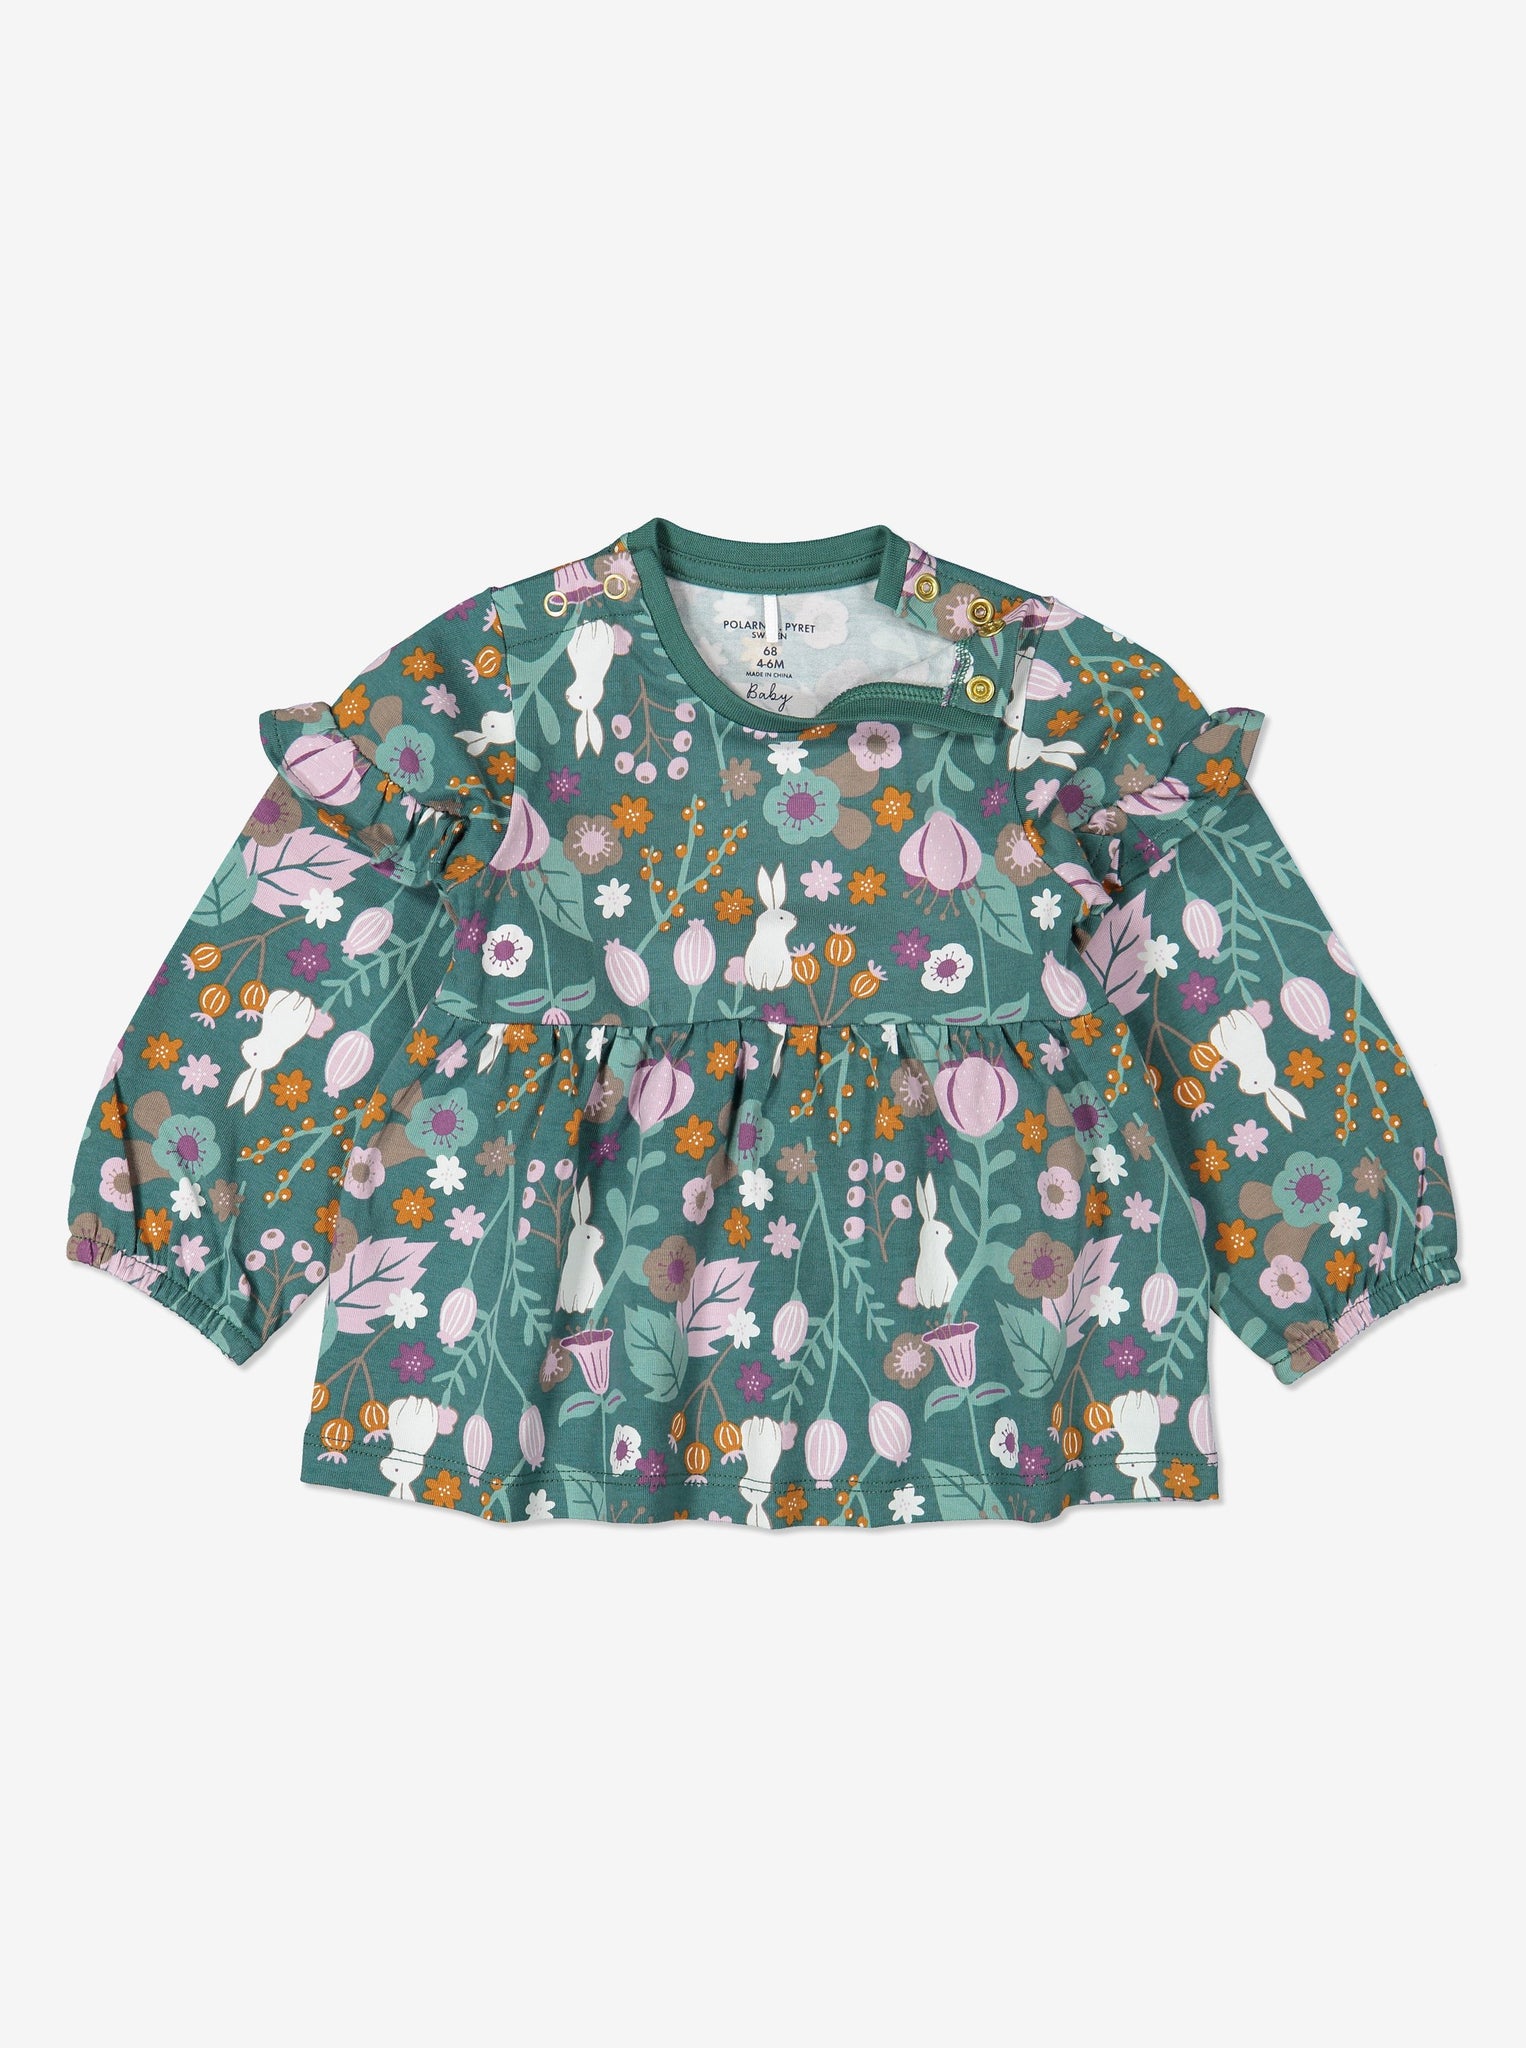 Woodland print top for baby girls with poppers on one shoulders for easy dressing, made from organic cotton fabric